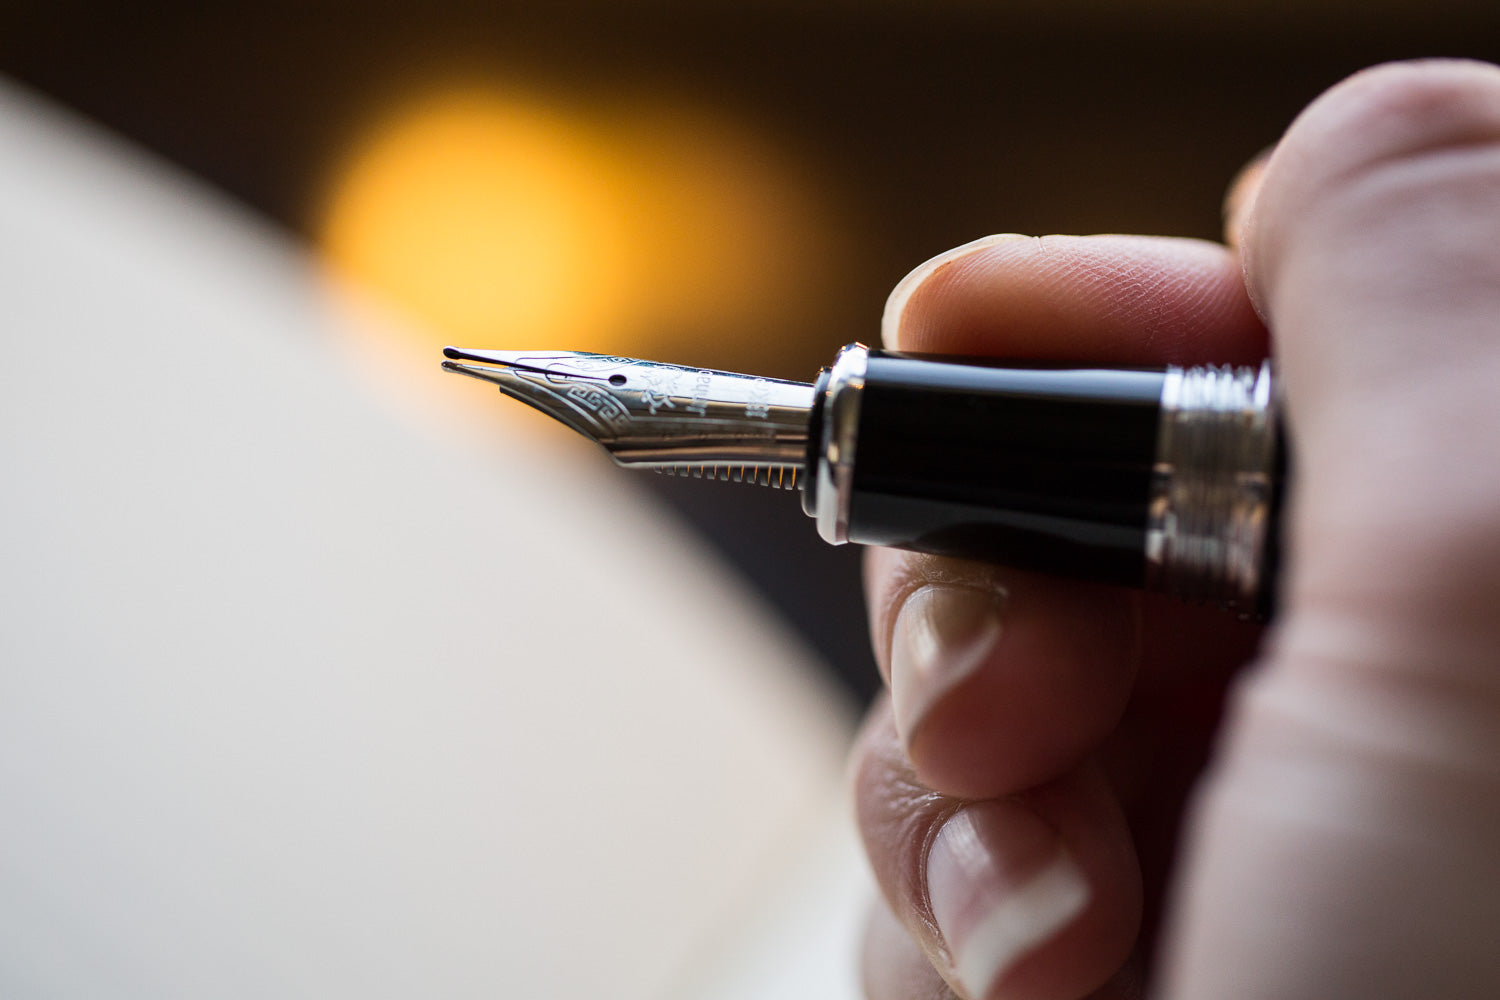 The Best Ink for Vintage Fountain Pens (Avoid These) - One Pen Show